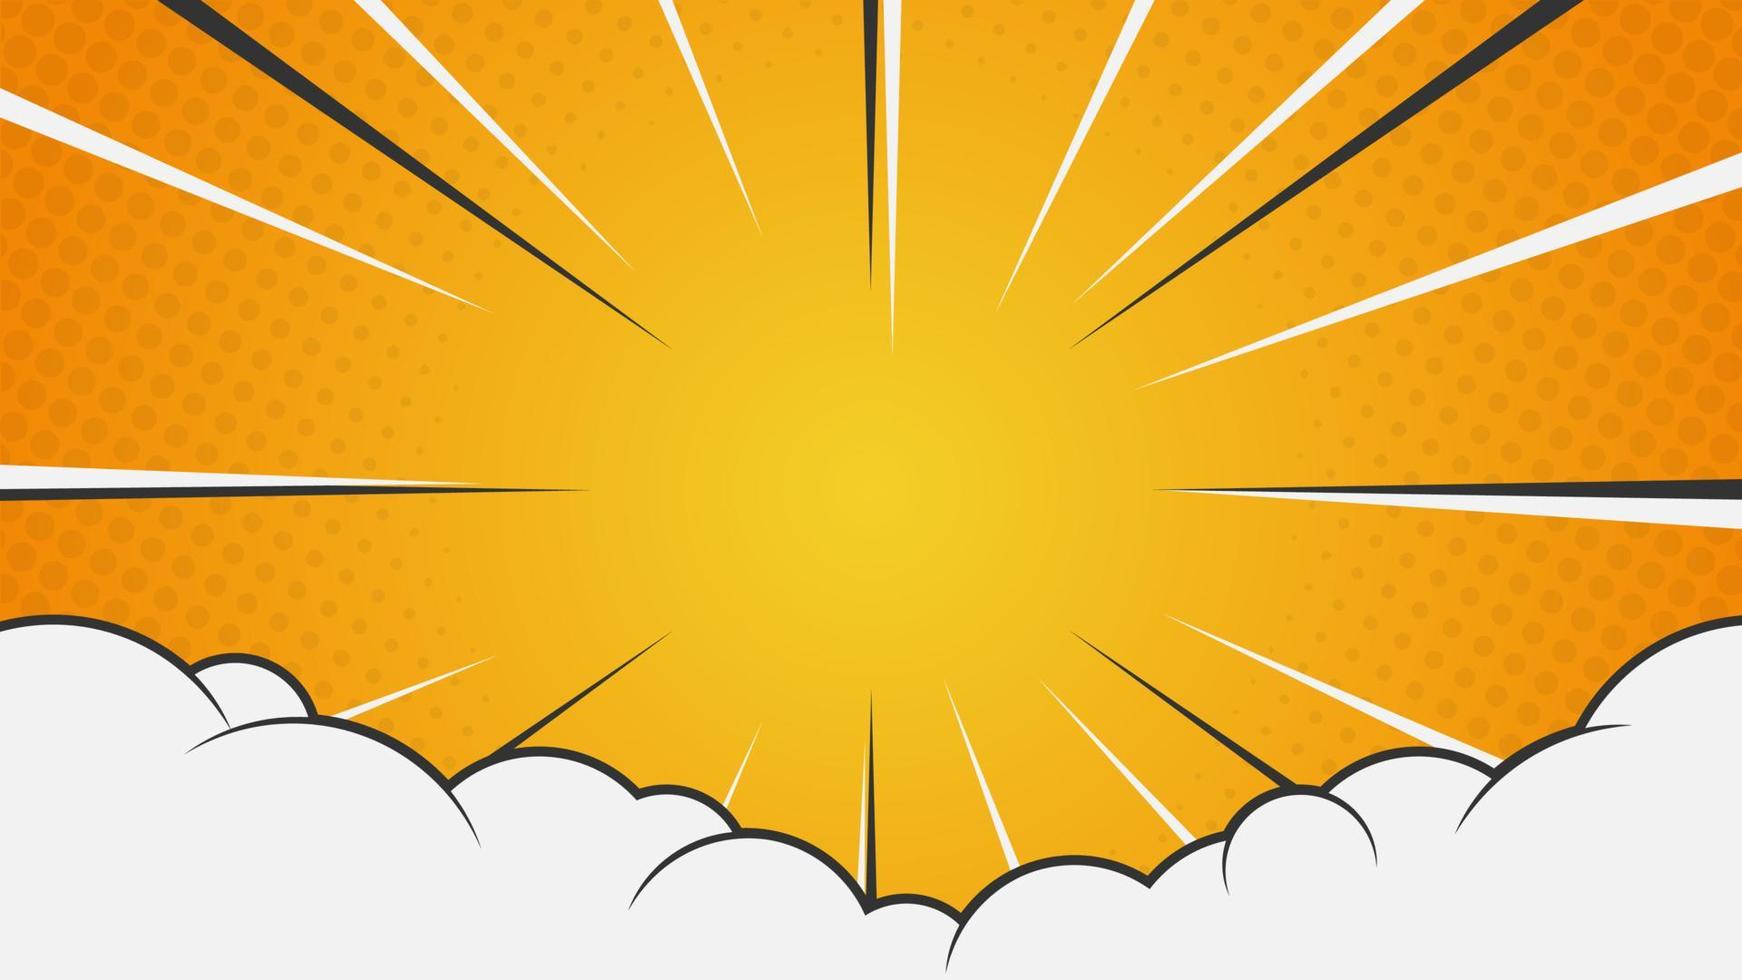 Comic style background with radial rays and clouds vector